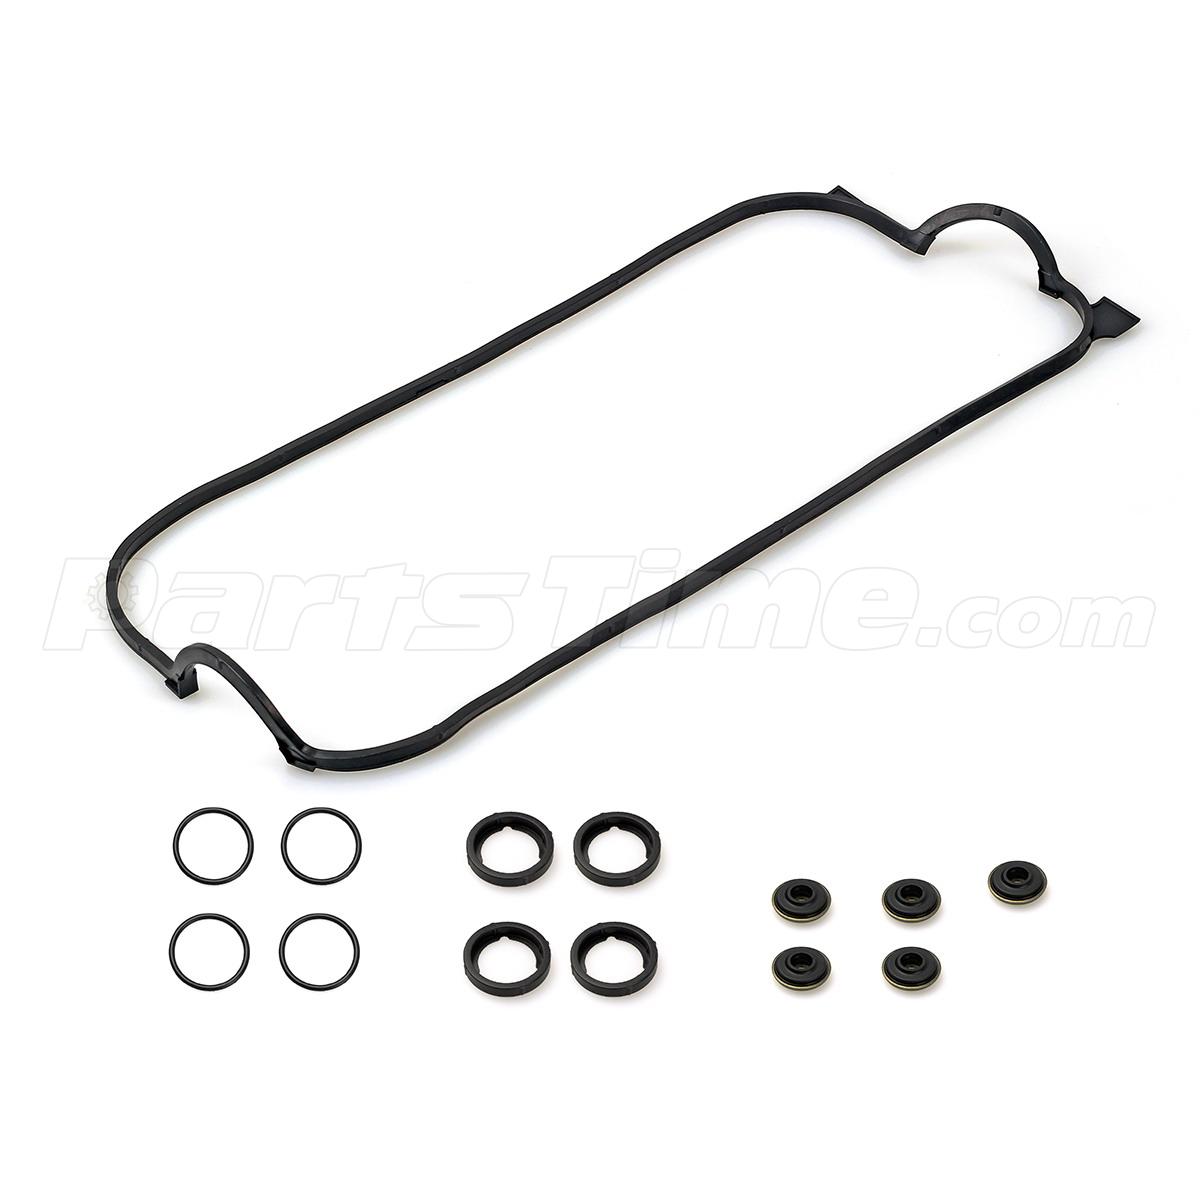 2011 honda odyssey valve cover gasket replacement